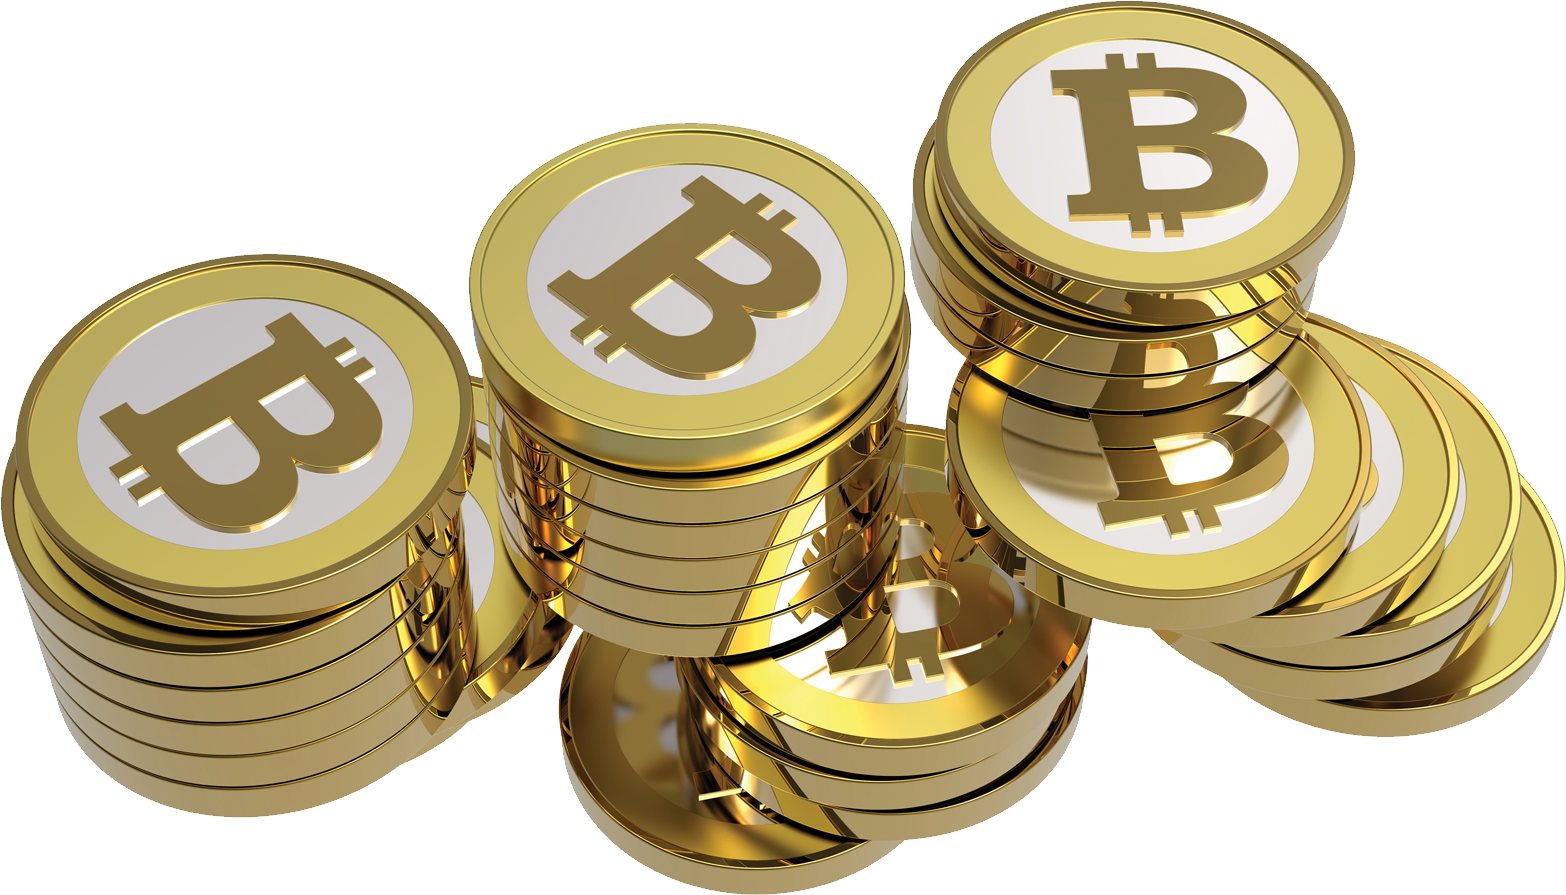 Money Bitcoin Free Download Image PNG Image